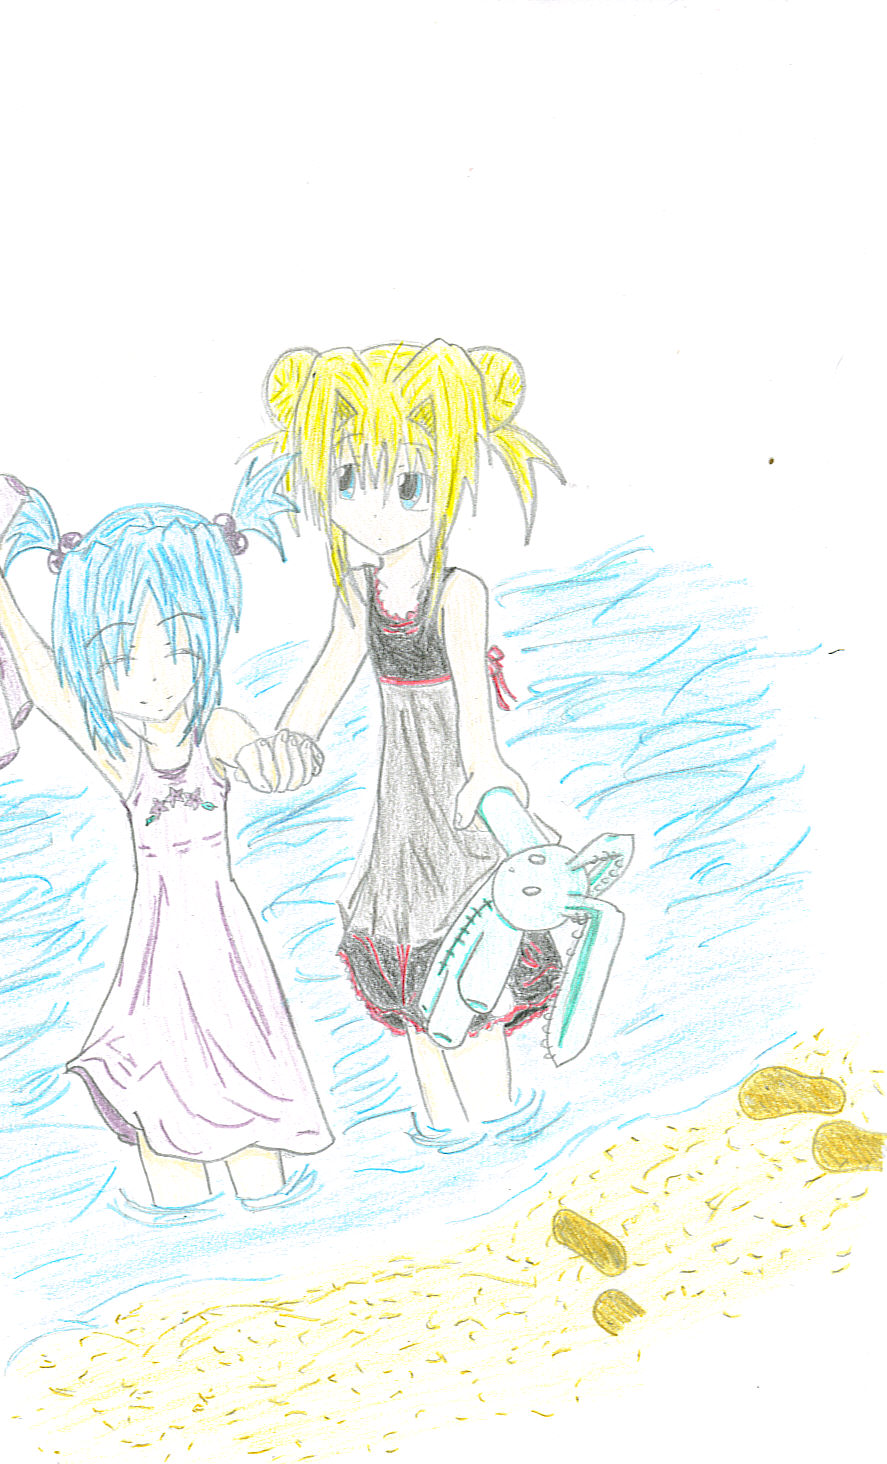 A day at the beach by kaname_yasha5689